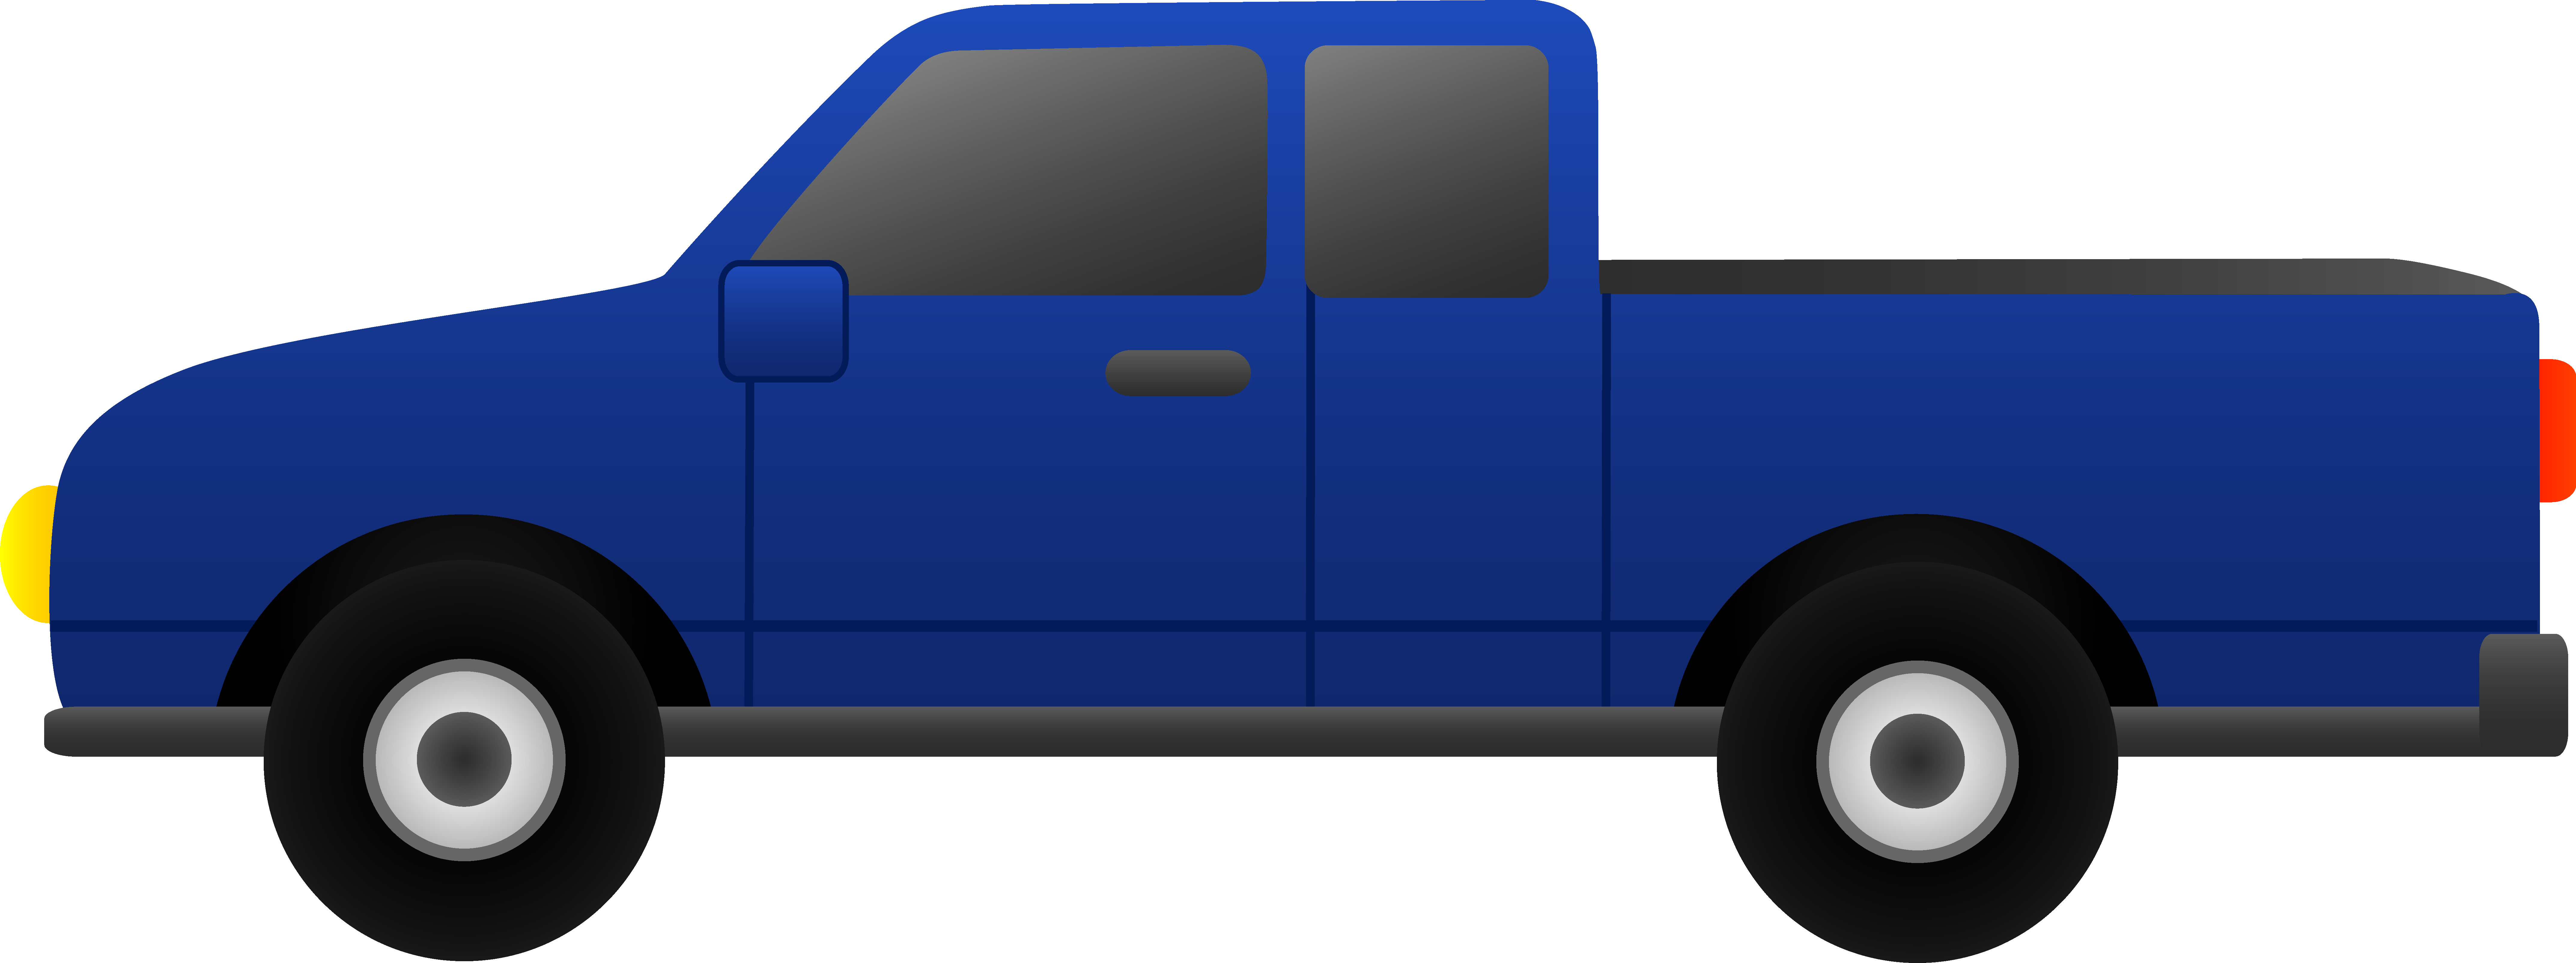 Truck Pictures Free | Free Download Clip Art | Free Clip Art | on ...